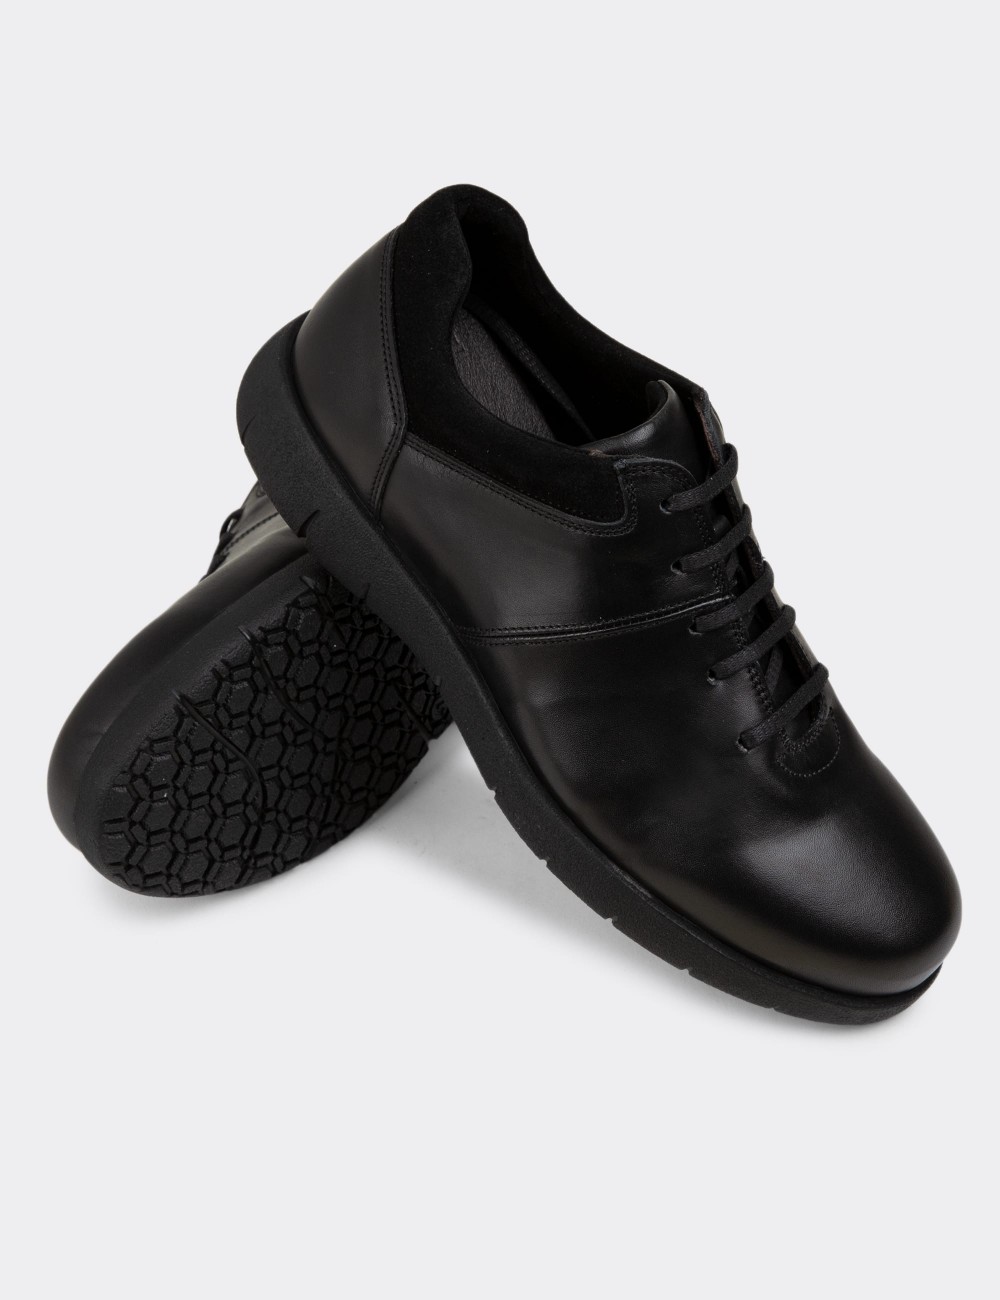 Black Leather Lace-up Shoes - 01949MSYHC01